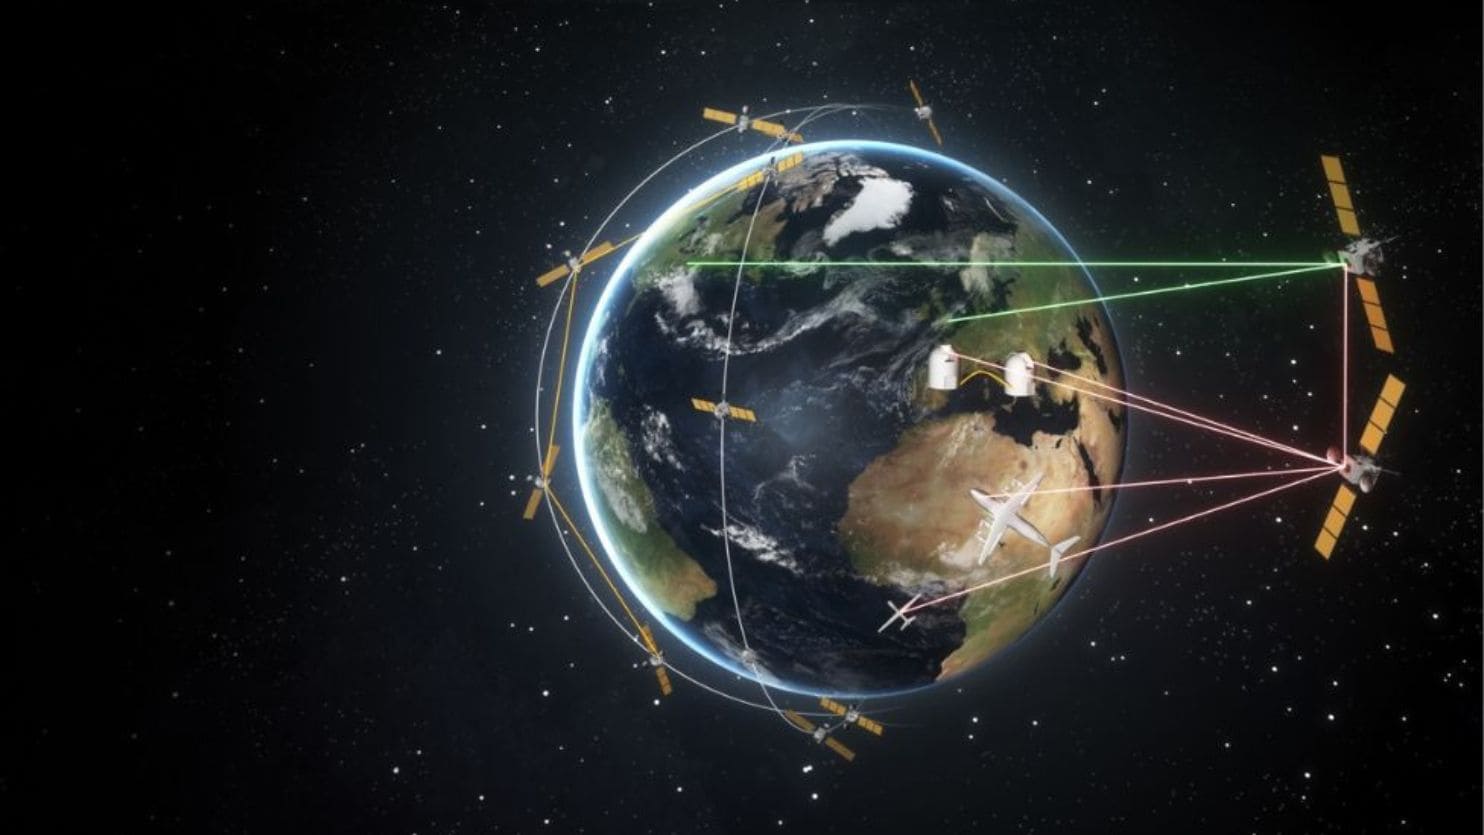 The Netherlands will soon have a laser satellite communication ecosystem